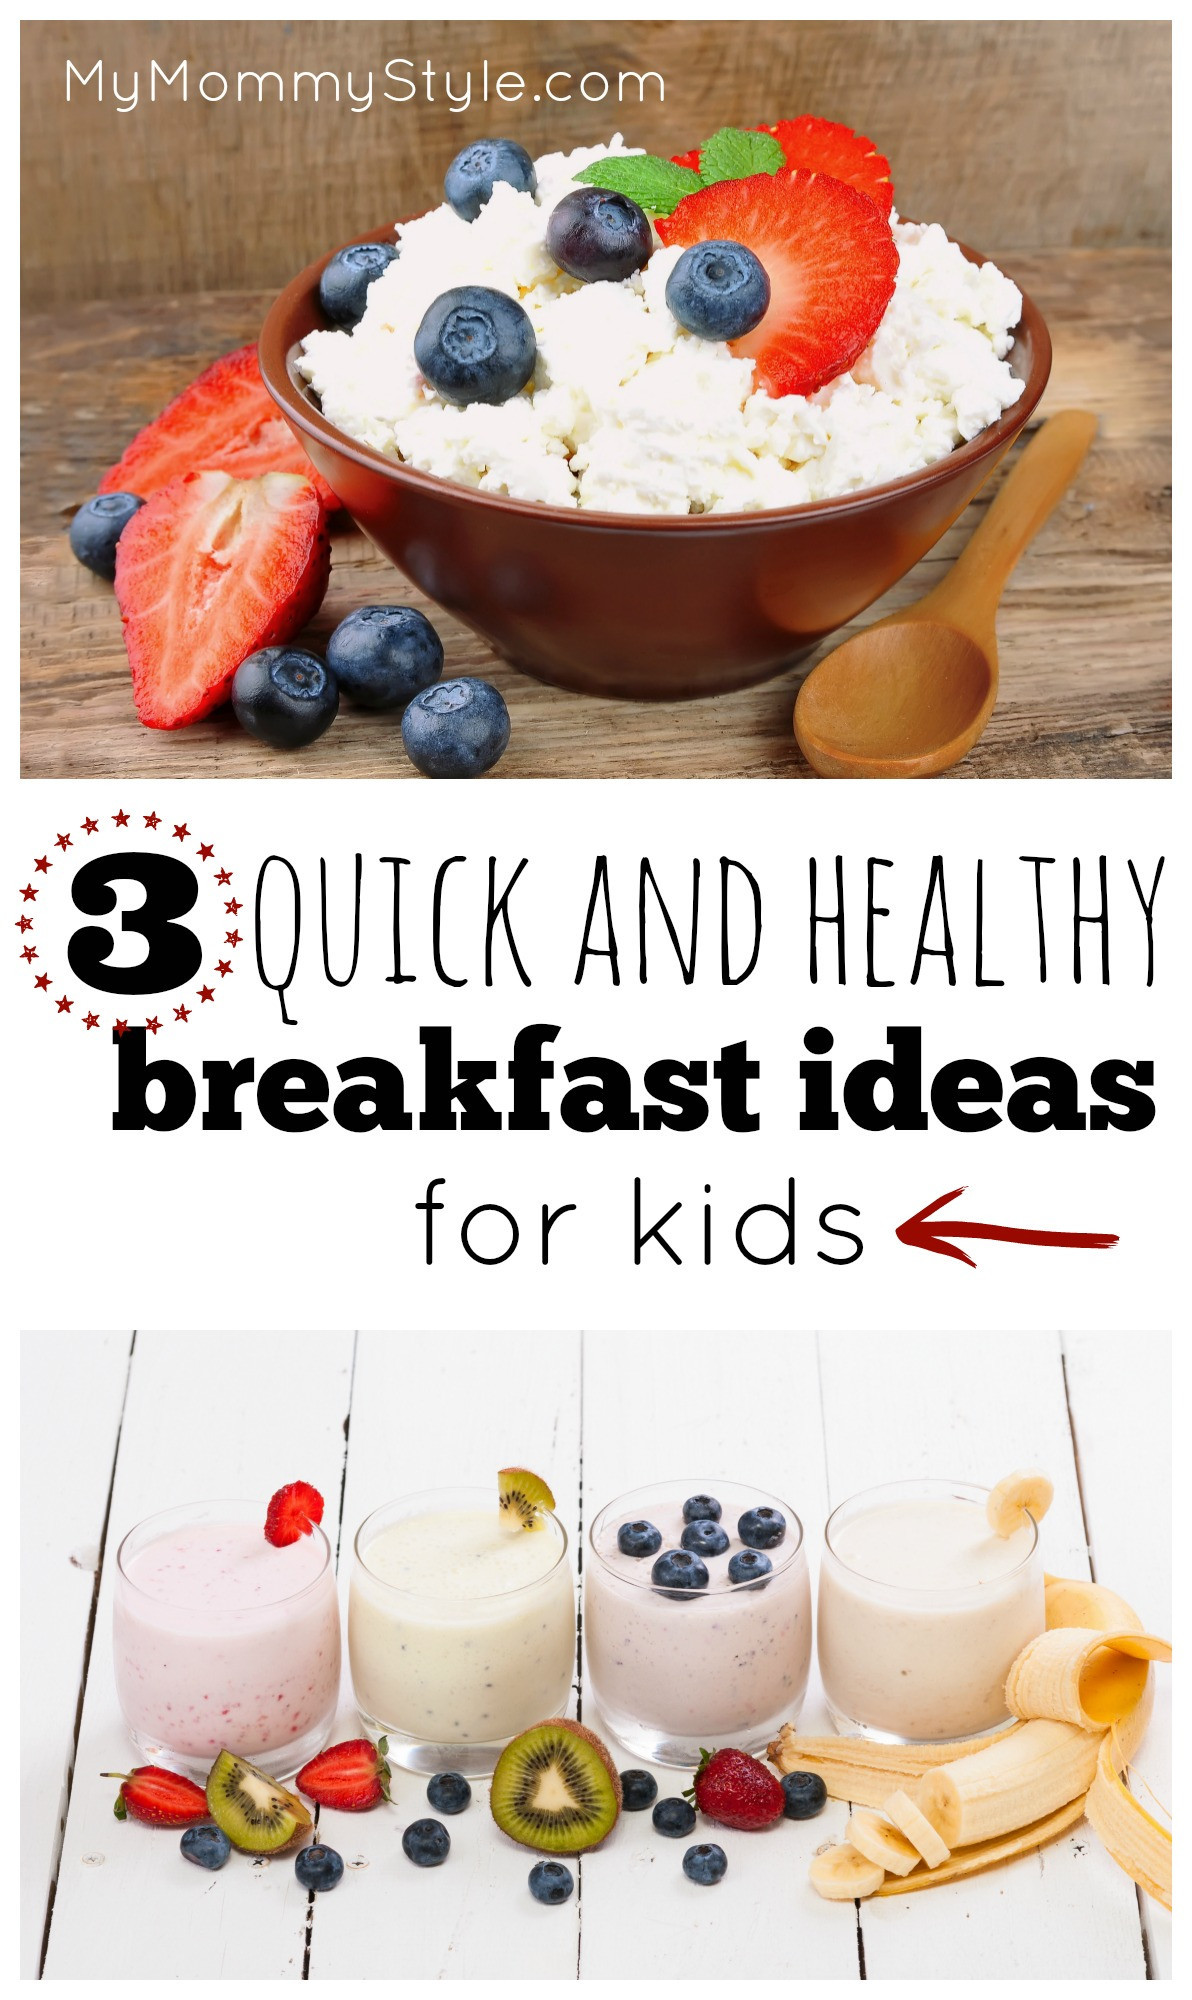 Healthy Breakfast Recipes For Kids
 3 Simple and Healthy Breakfast Ideas My Mommy Style